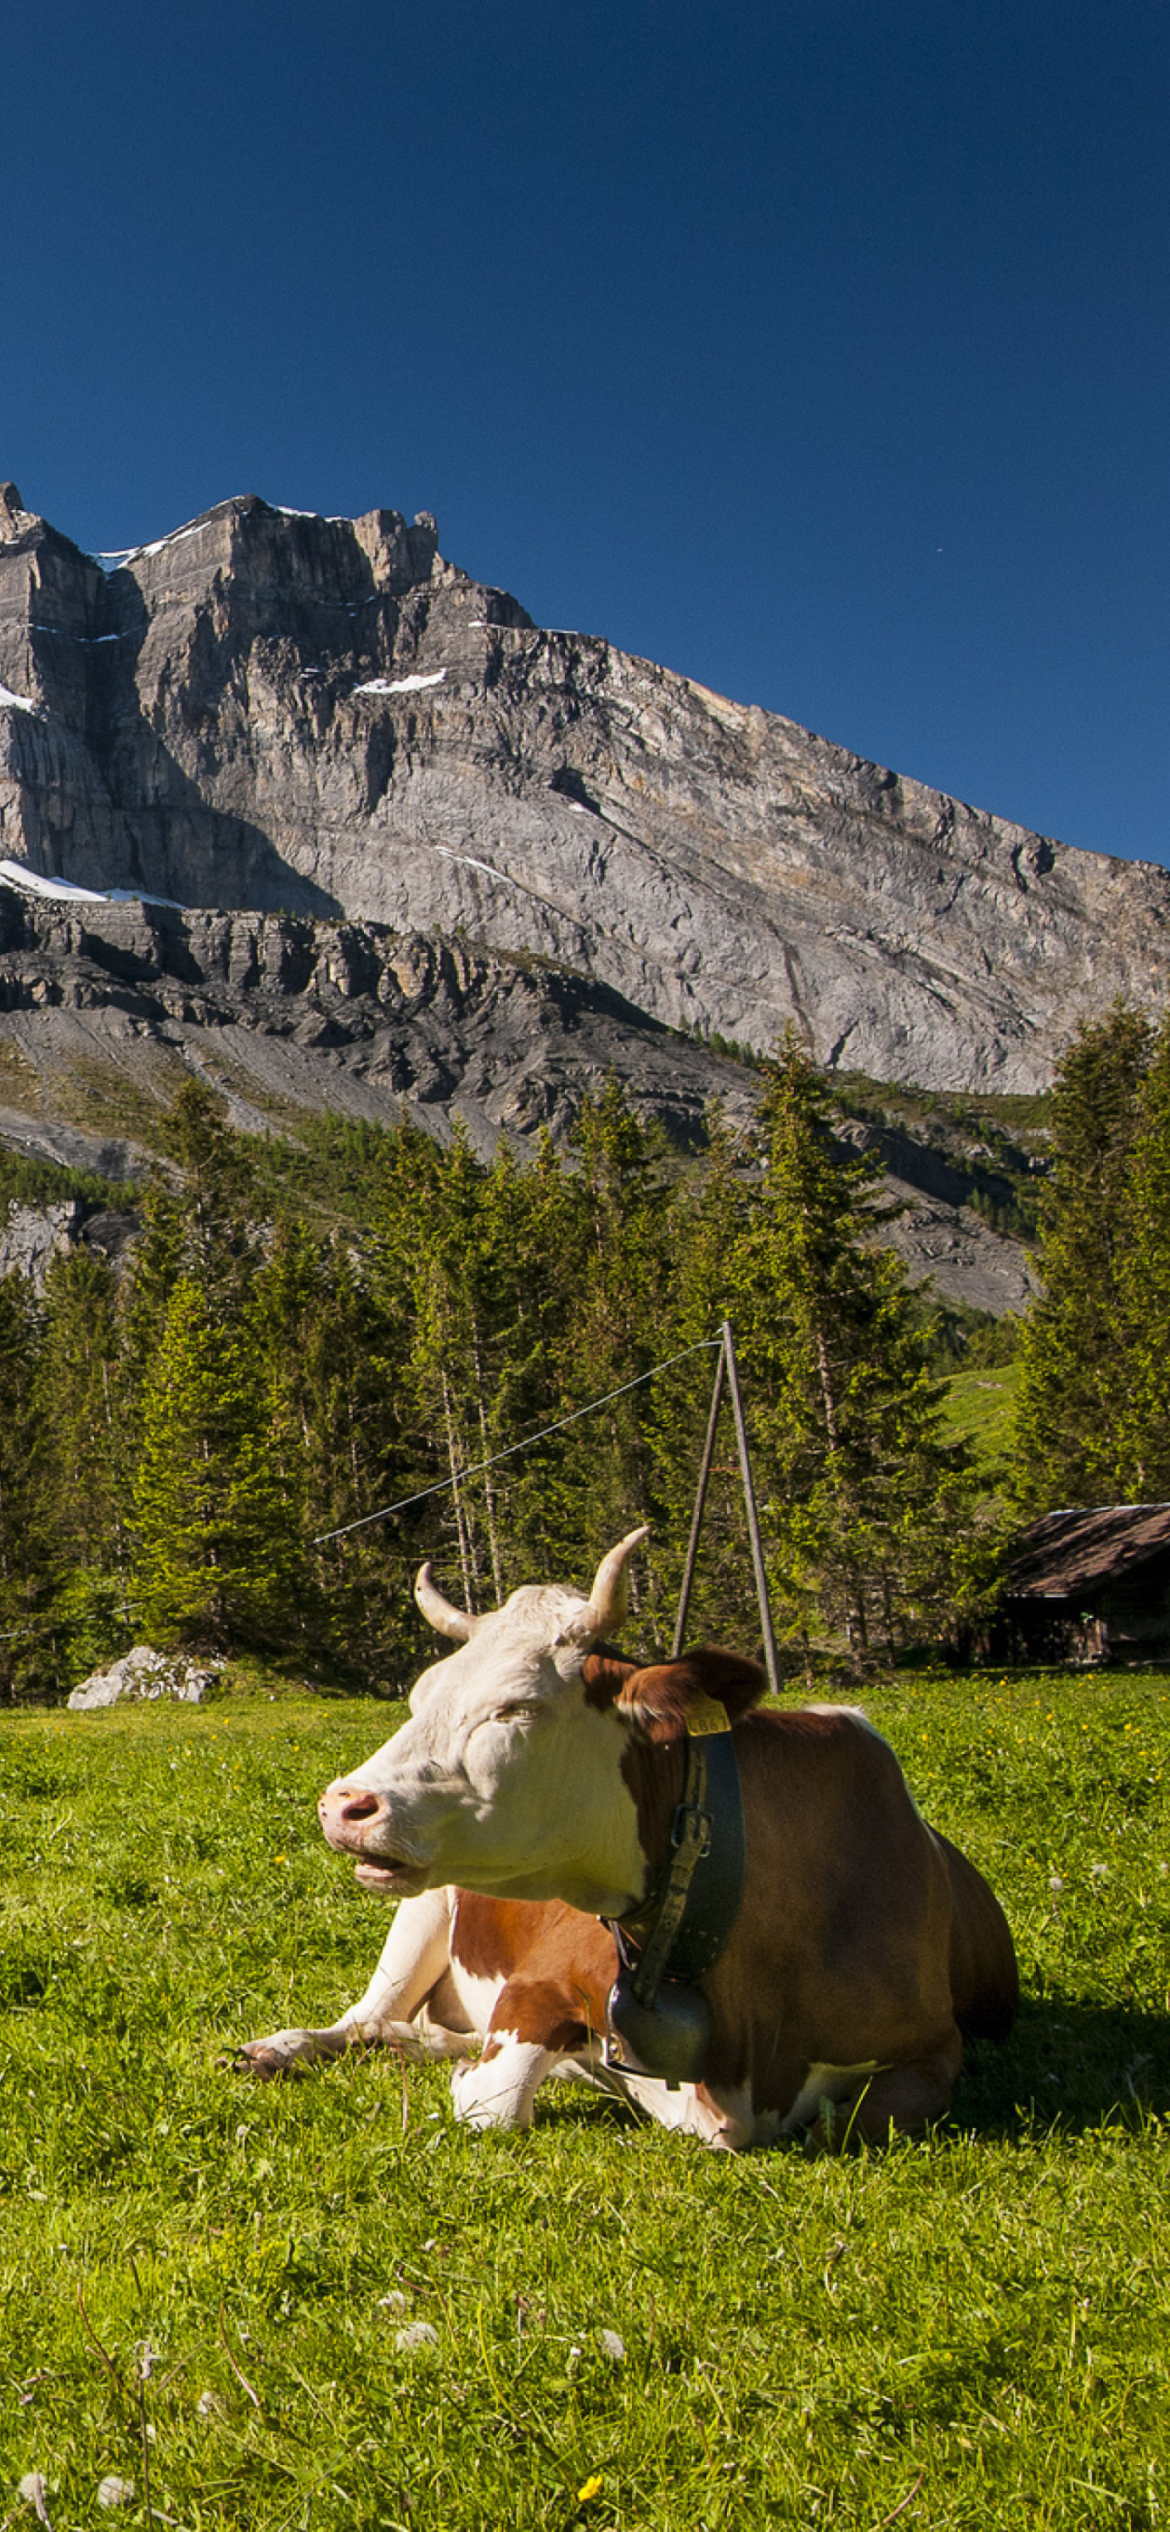 Switzerland Mountains And Cows wallpaper 1170x2532